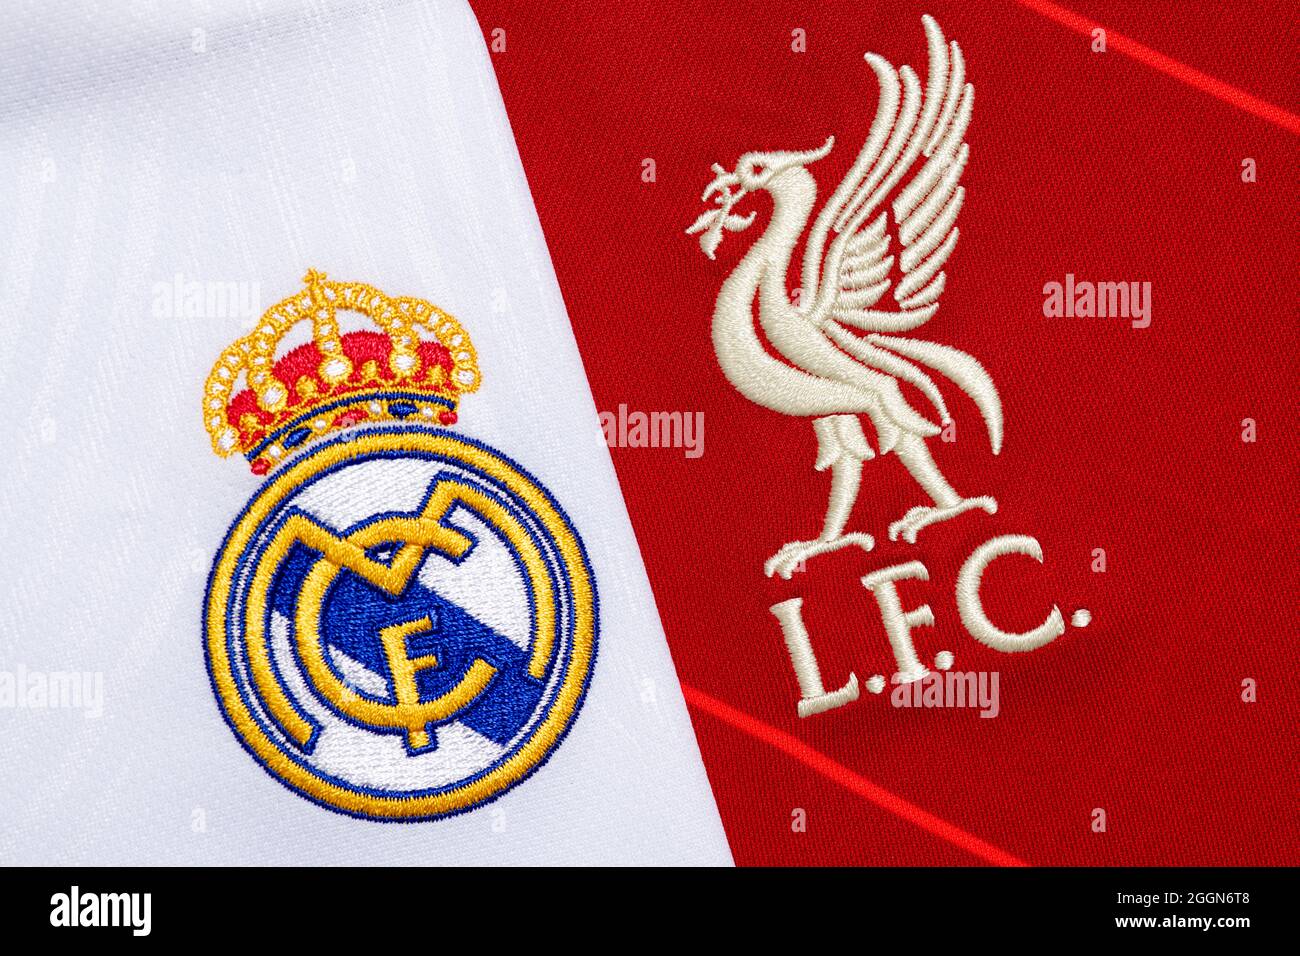 Close up of Liverpool & Real Madrid club crest. Stock Photo